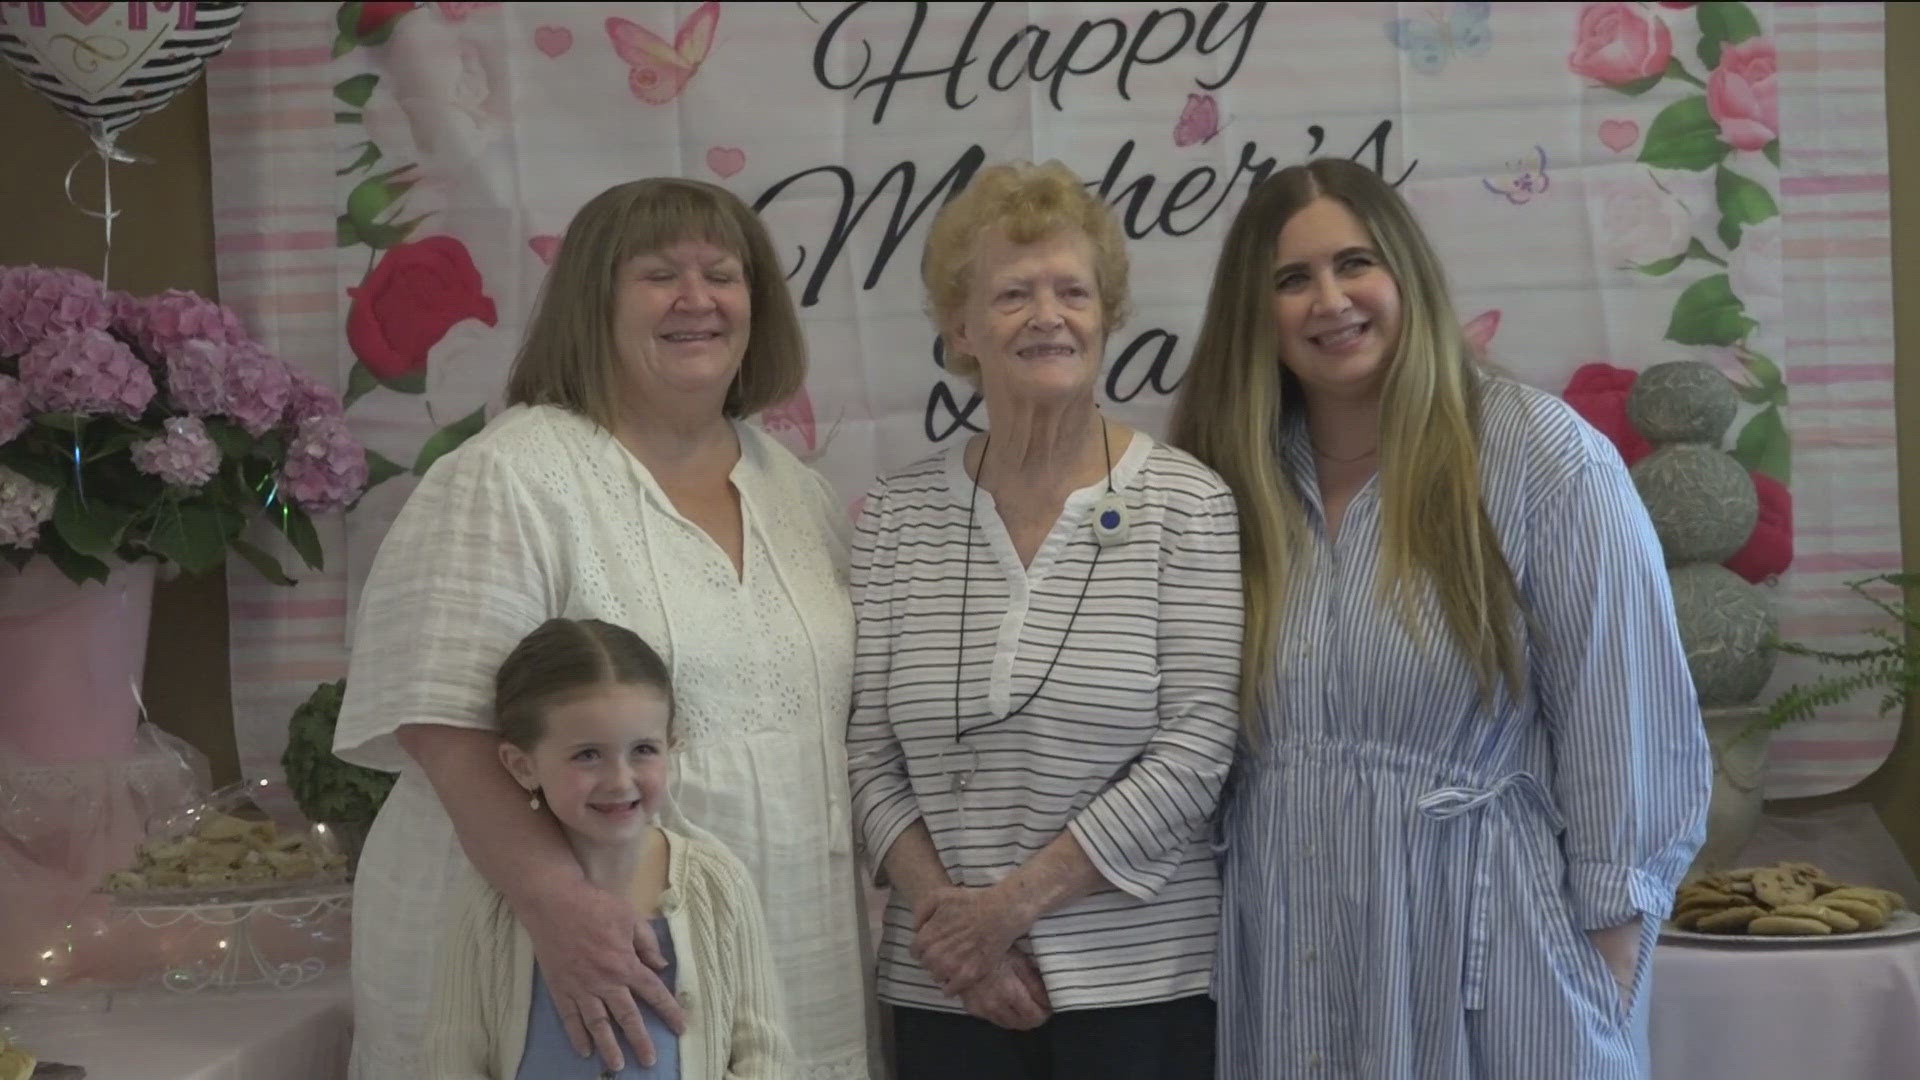 Jeanette Sams enjoyed the company of three generations — her daughter, granddaughter, and great-granddaughter.